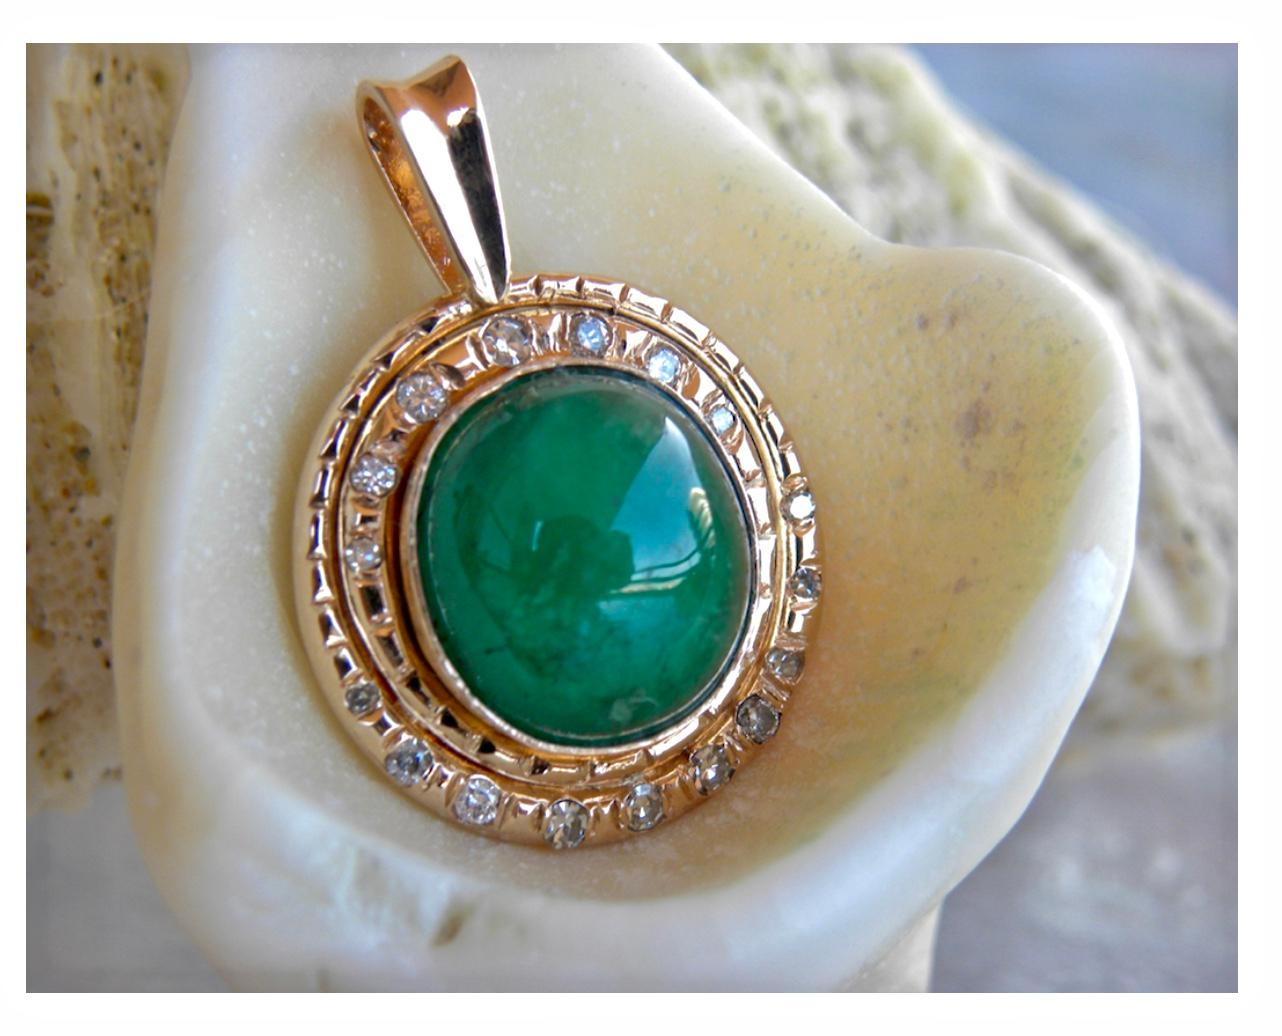 This stunning victorian stylish pendant feature one genuine 100% natural Colombian cabochon emerald.
This quality cabochon emerald weigh 7.58 carat. There are 7 diamonds sitting above the emerald and 10 under, sparkling white diamonds totaling 0.20